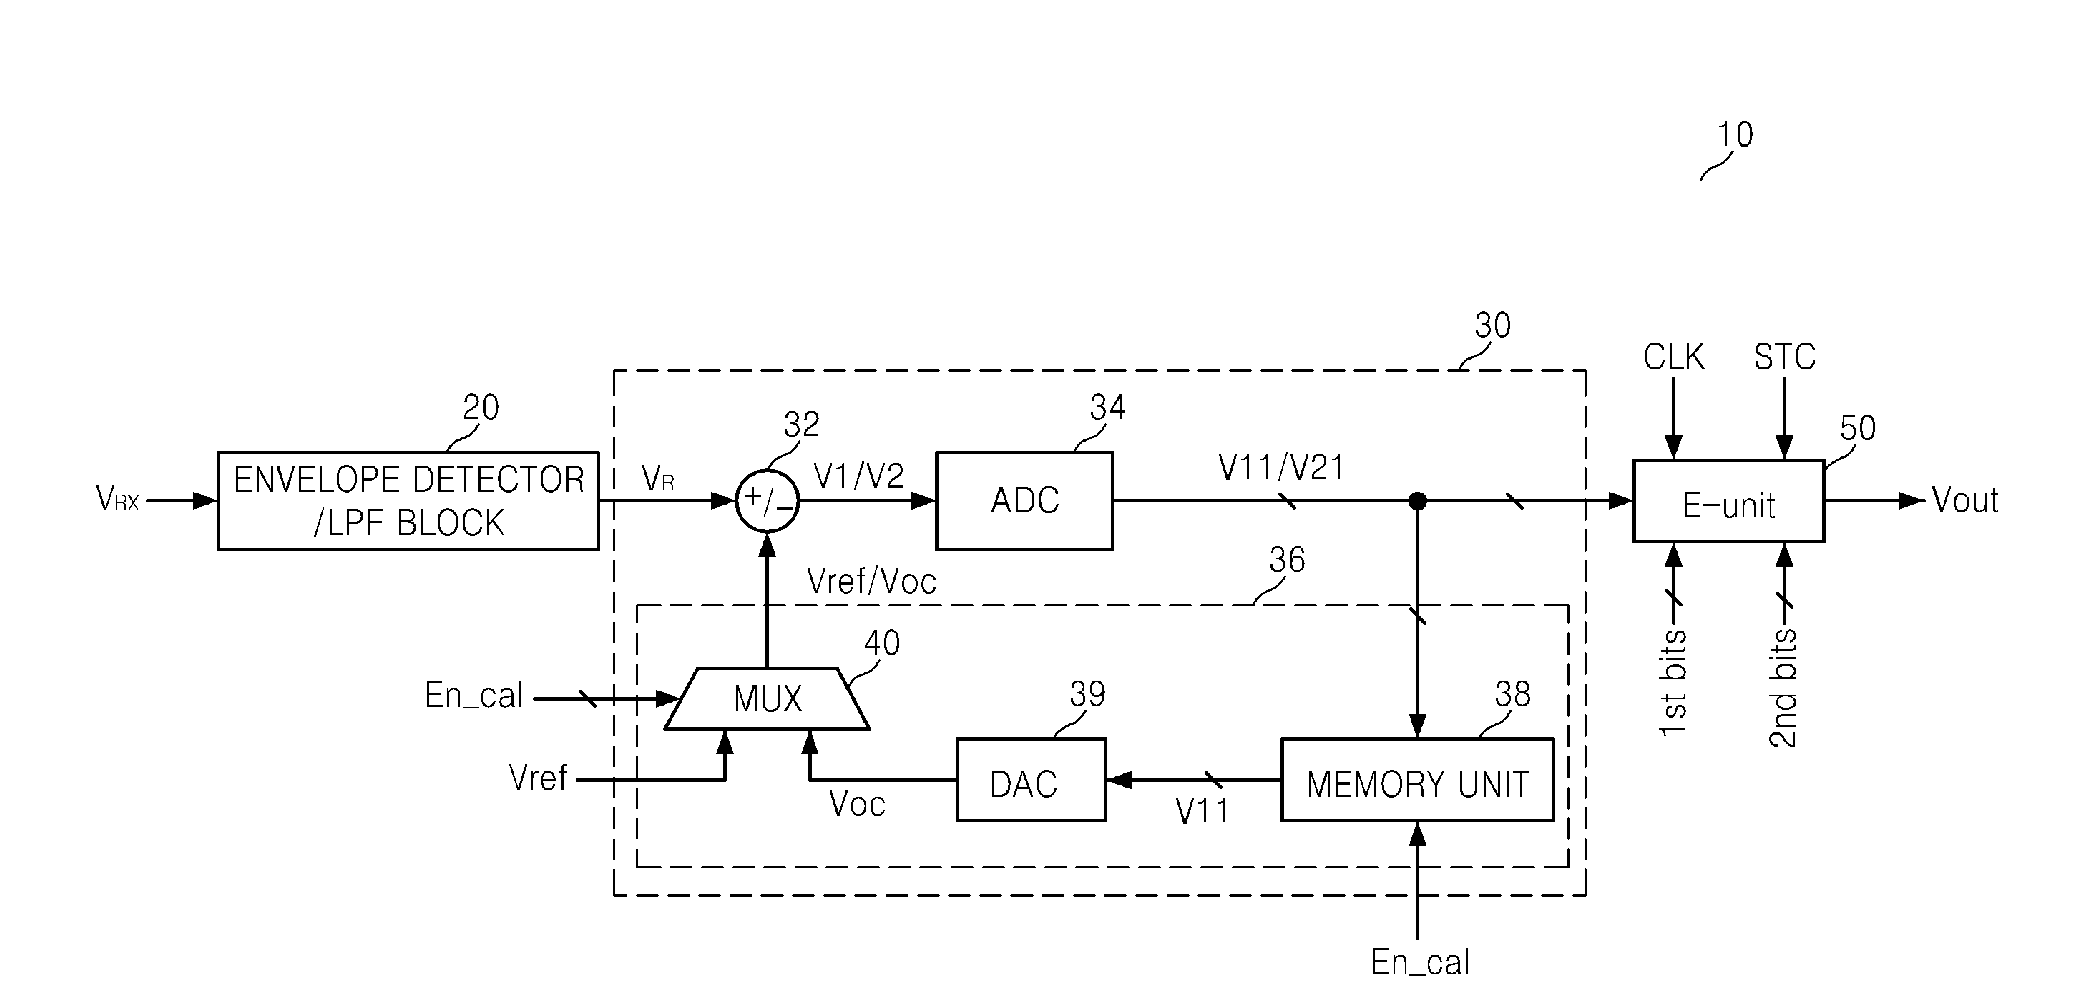 Demodulator Capable of Compensating Offset Voltage of RF Signal and Method Thereof